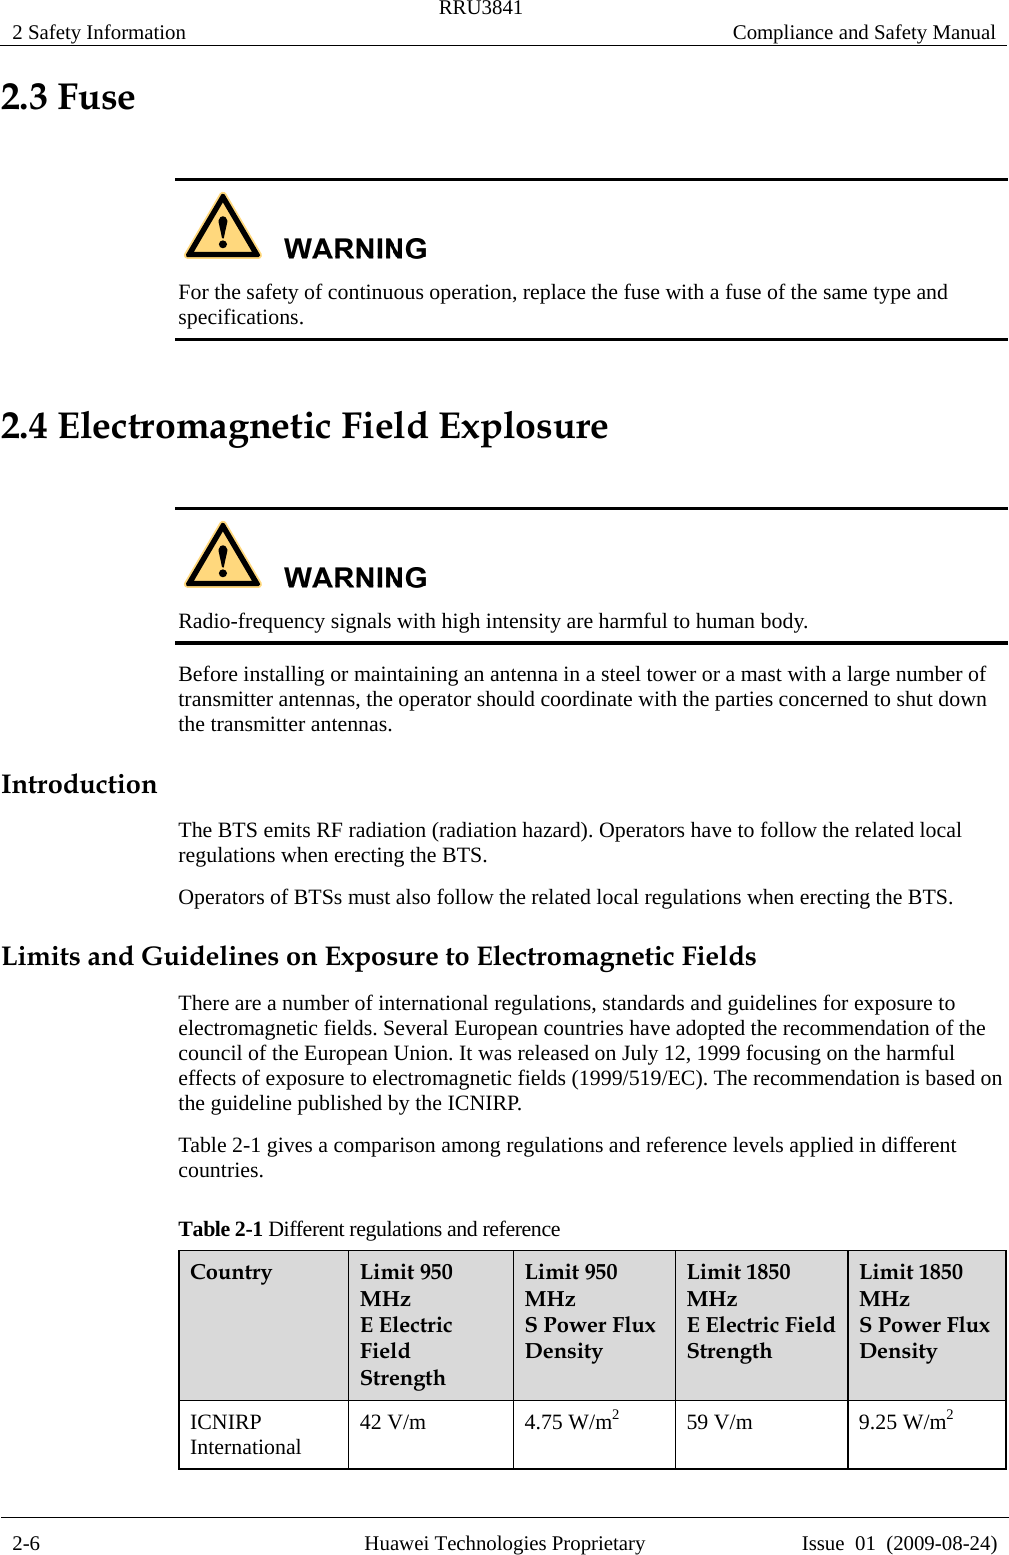 2 Safety Information  RRU3841  Compliance and Safety Manual  2-6  Huawei Technologies Proprietary  Issue  01  (2009-08-24) 2.3 Fuse   For the safety of continuous operation, replace the fuse with a fuse of the same type and specifications. 2.4 Electromagnetic Field Explosure   Radio-frequency signals with high intensity are harmful to human body. Before installing or maintaining an antenna in a steel tower or a mast with a large number of transmitter antennas, the operator should coordinate with the parties concerned to shut down the transmitter antennas. Introduction The BTS emits RF radiation (radiation hazard). Operators have to follow the related local regulations when erecting the BTS. Operators of BTSs must also follow the related local regulations when erecting the BTS. Limits and Guidelines on Exposure to Electromagnetic Fields There are a number of international regulations, standards and guidelines for exposure to electromagnetic fields. Several European countries have adopted the recommendation of the council of the European Union. It was released on July 12, 1999 focusing on the harmful effects of exposure to electromagnetic fields (1999/519/EC). The recommendation is based on the guideline published by the ICNIRP. Table 2-1 gives a comparison among regulations and reference levels applied in different countries. Table 2-1 Different regulations and reference Country  Limit 950 MHz  E Electric Field Strength  Limit 950 MHz  S Power Flux Density  Limit 1850 MHz  E Electric Field Strength  Limit 1850 MHz  S Power Flux Density   ICNIRP International  42 V/m  4.75 W/m2  59 V/m  9.25 W/m2 